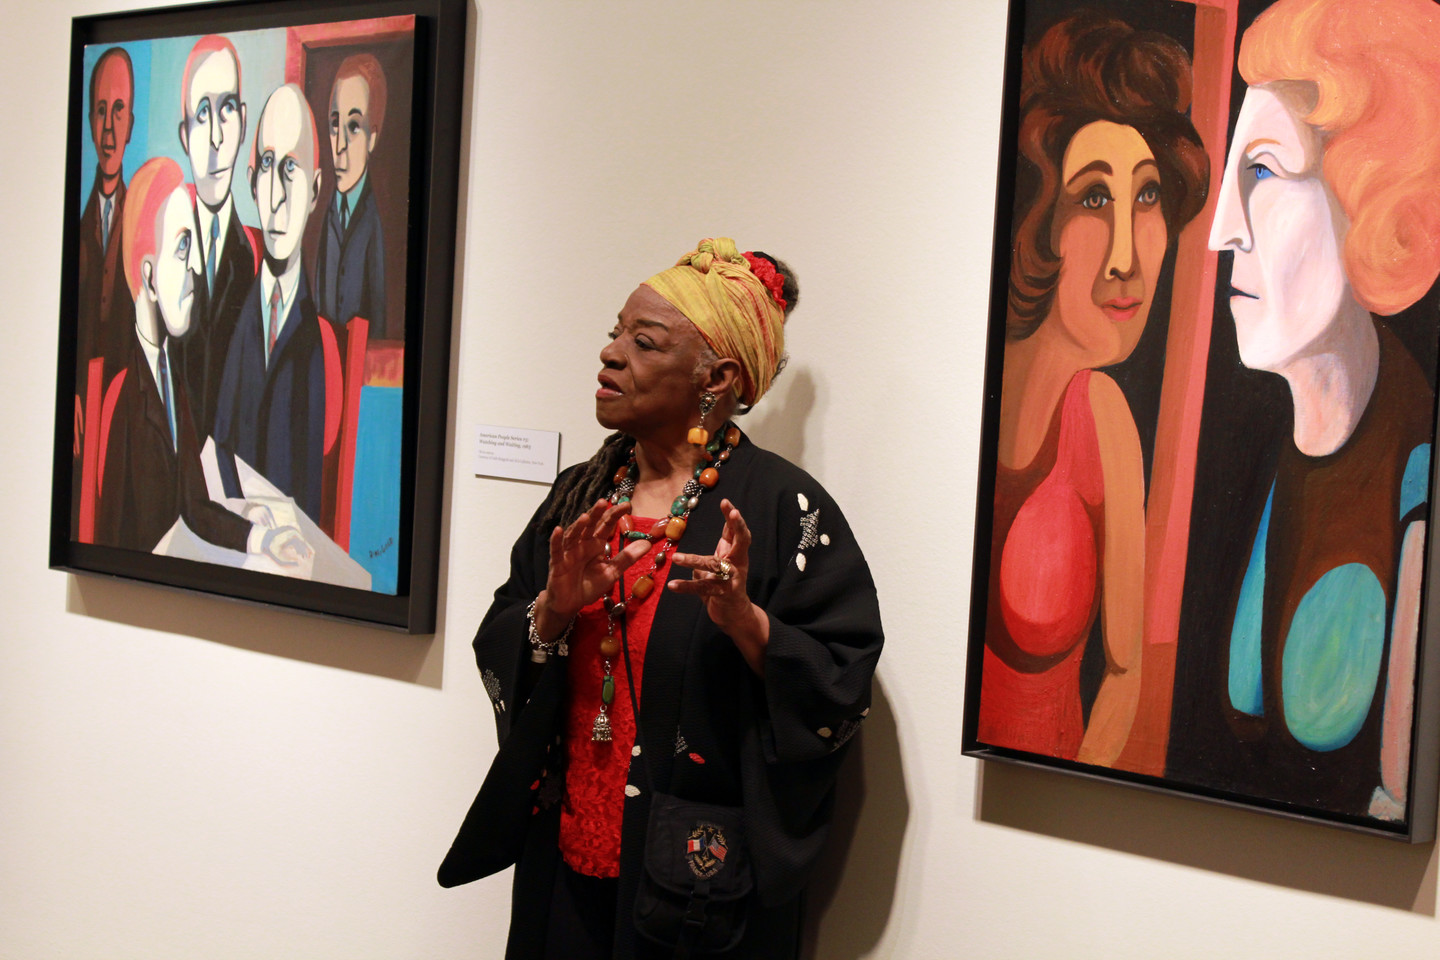 Faith Ringgold stands and speaks, gesturing with her hands, in front of her portrait paintings. She is a dark-skinned adult woman wearing colorful clothing and a black sweater, including a yellow head wrap and chunky jewelry—rings, earrings, necklaces, and bracelets.